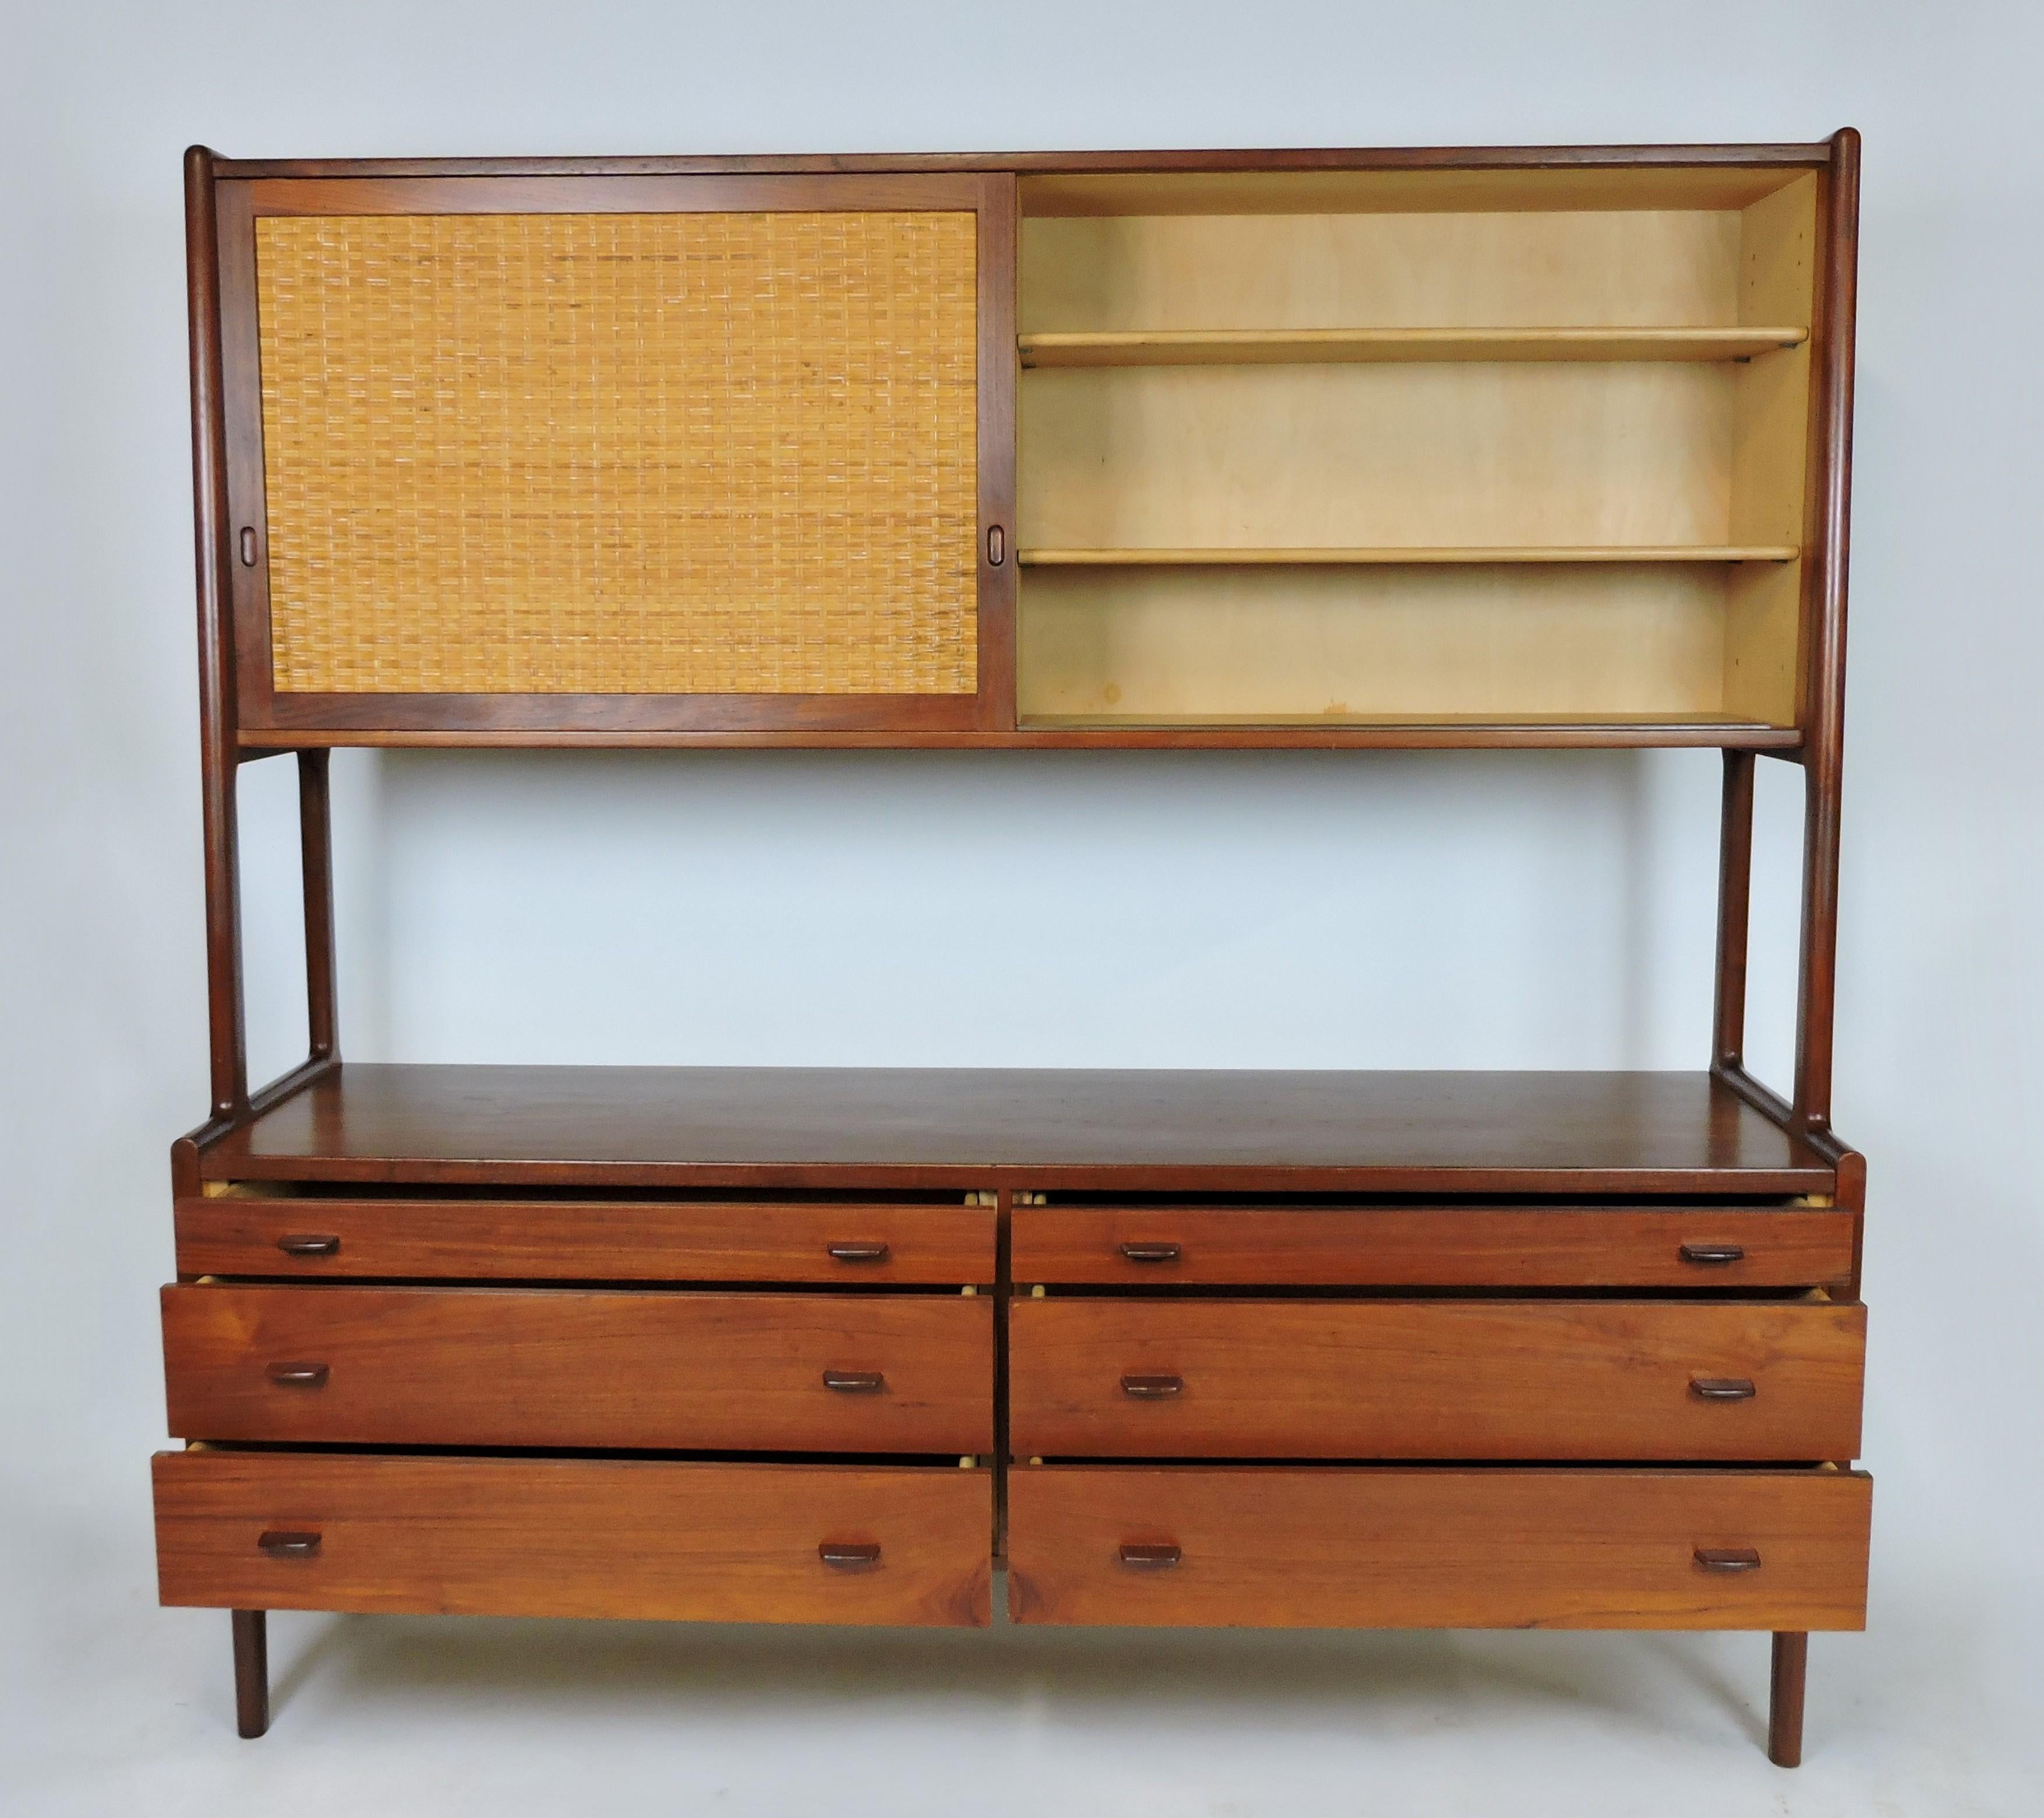 Beautiful two-tier credenza in teak designed by Hans Wegner, manufactured in Denmark by Ry Mobler, and sold through high end retailer, George Tanier. This cabinet has six drawers on the bottom and five adjustable shelves behind two sliding doors